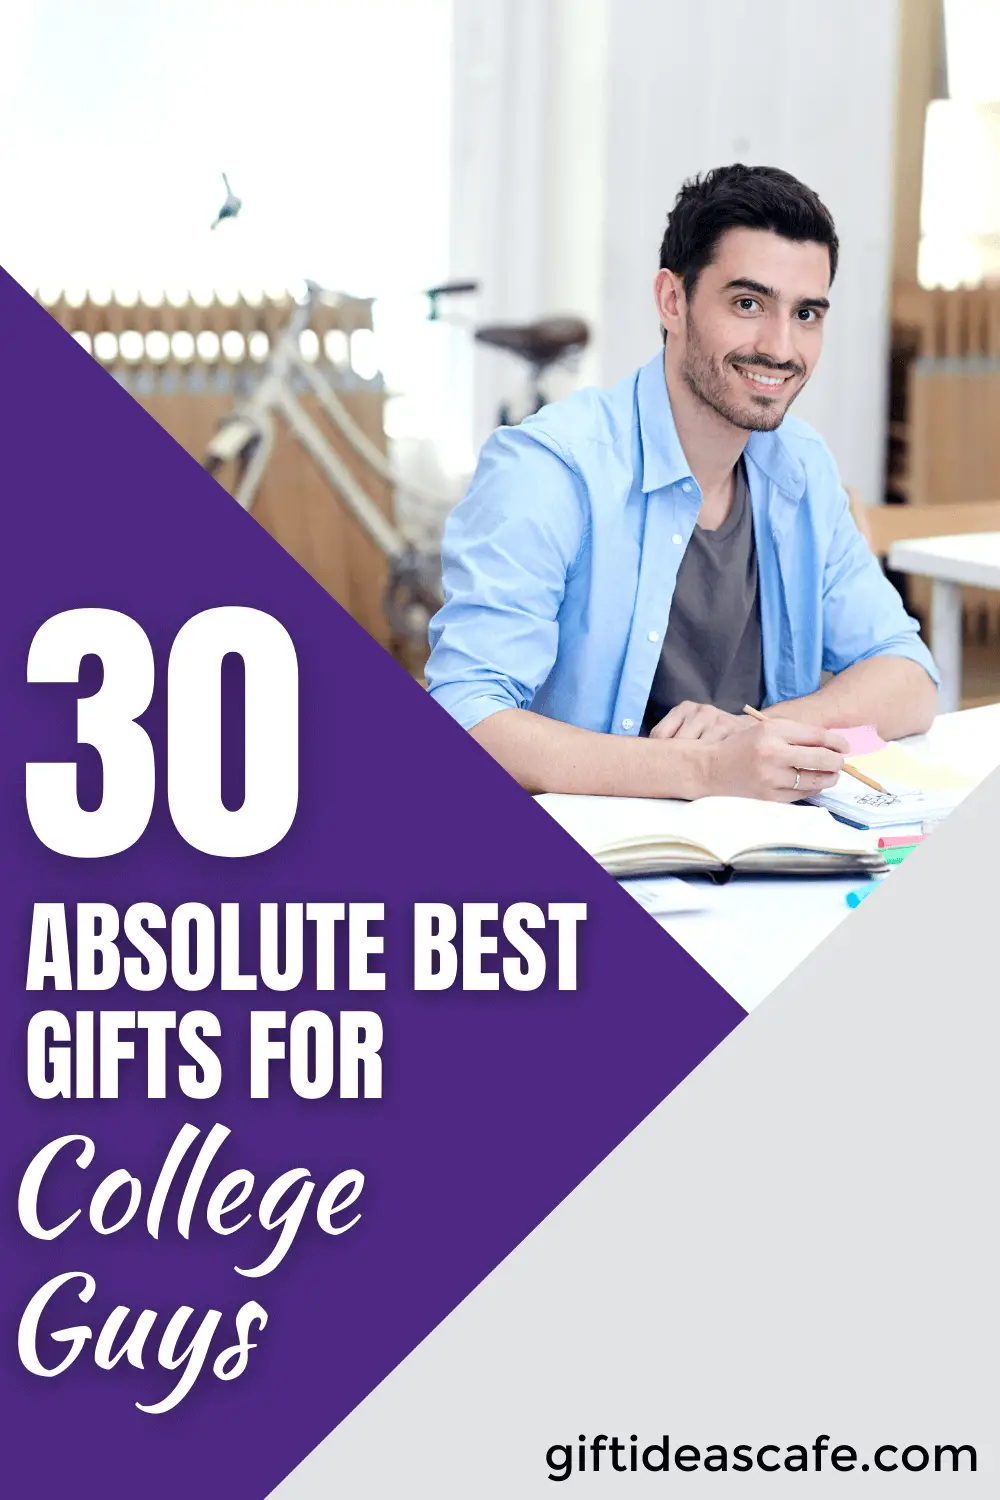 30 Absolute Best Gifts for College Guys - Gift Ideas Cafe